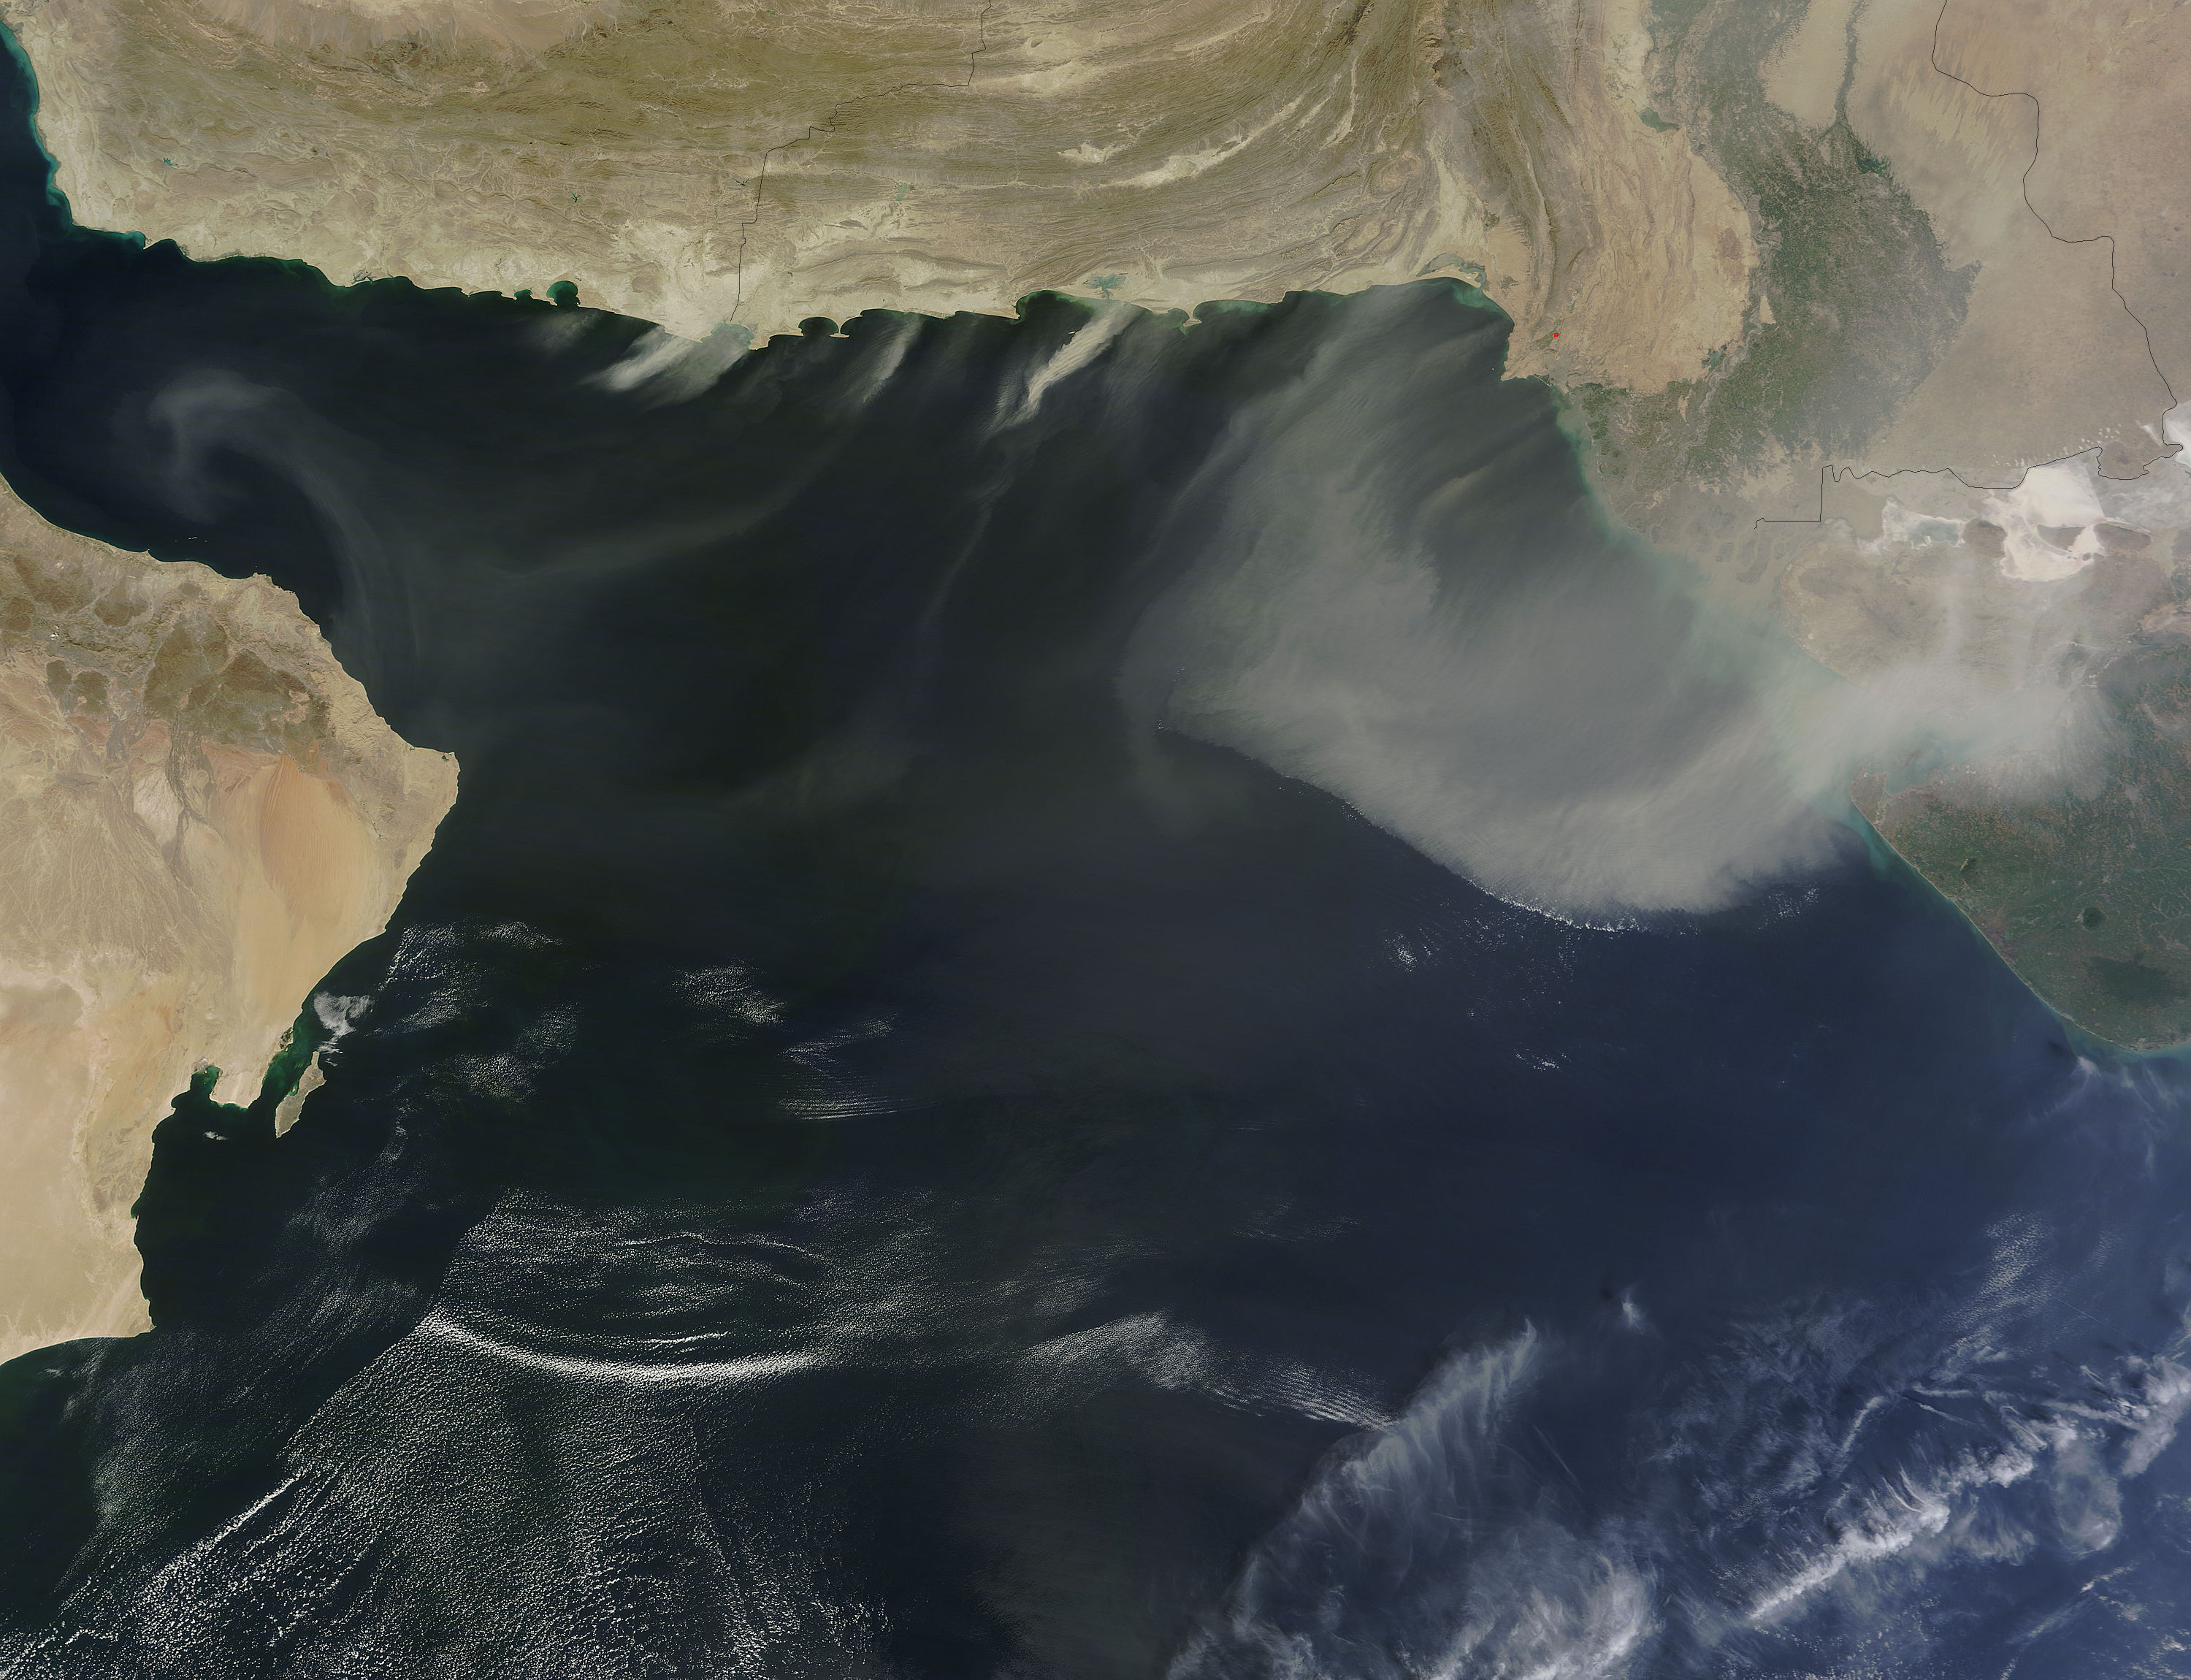 Dust storms off the coast of Iran and Pakistan - related image preview